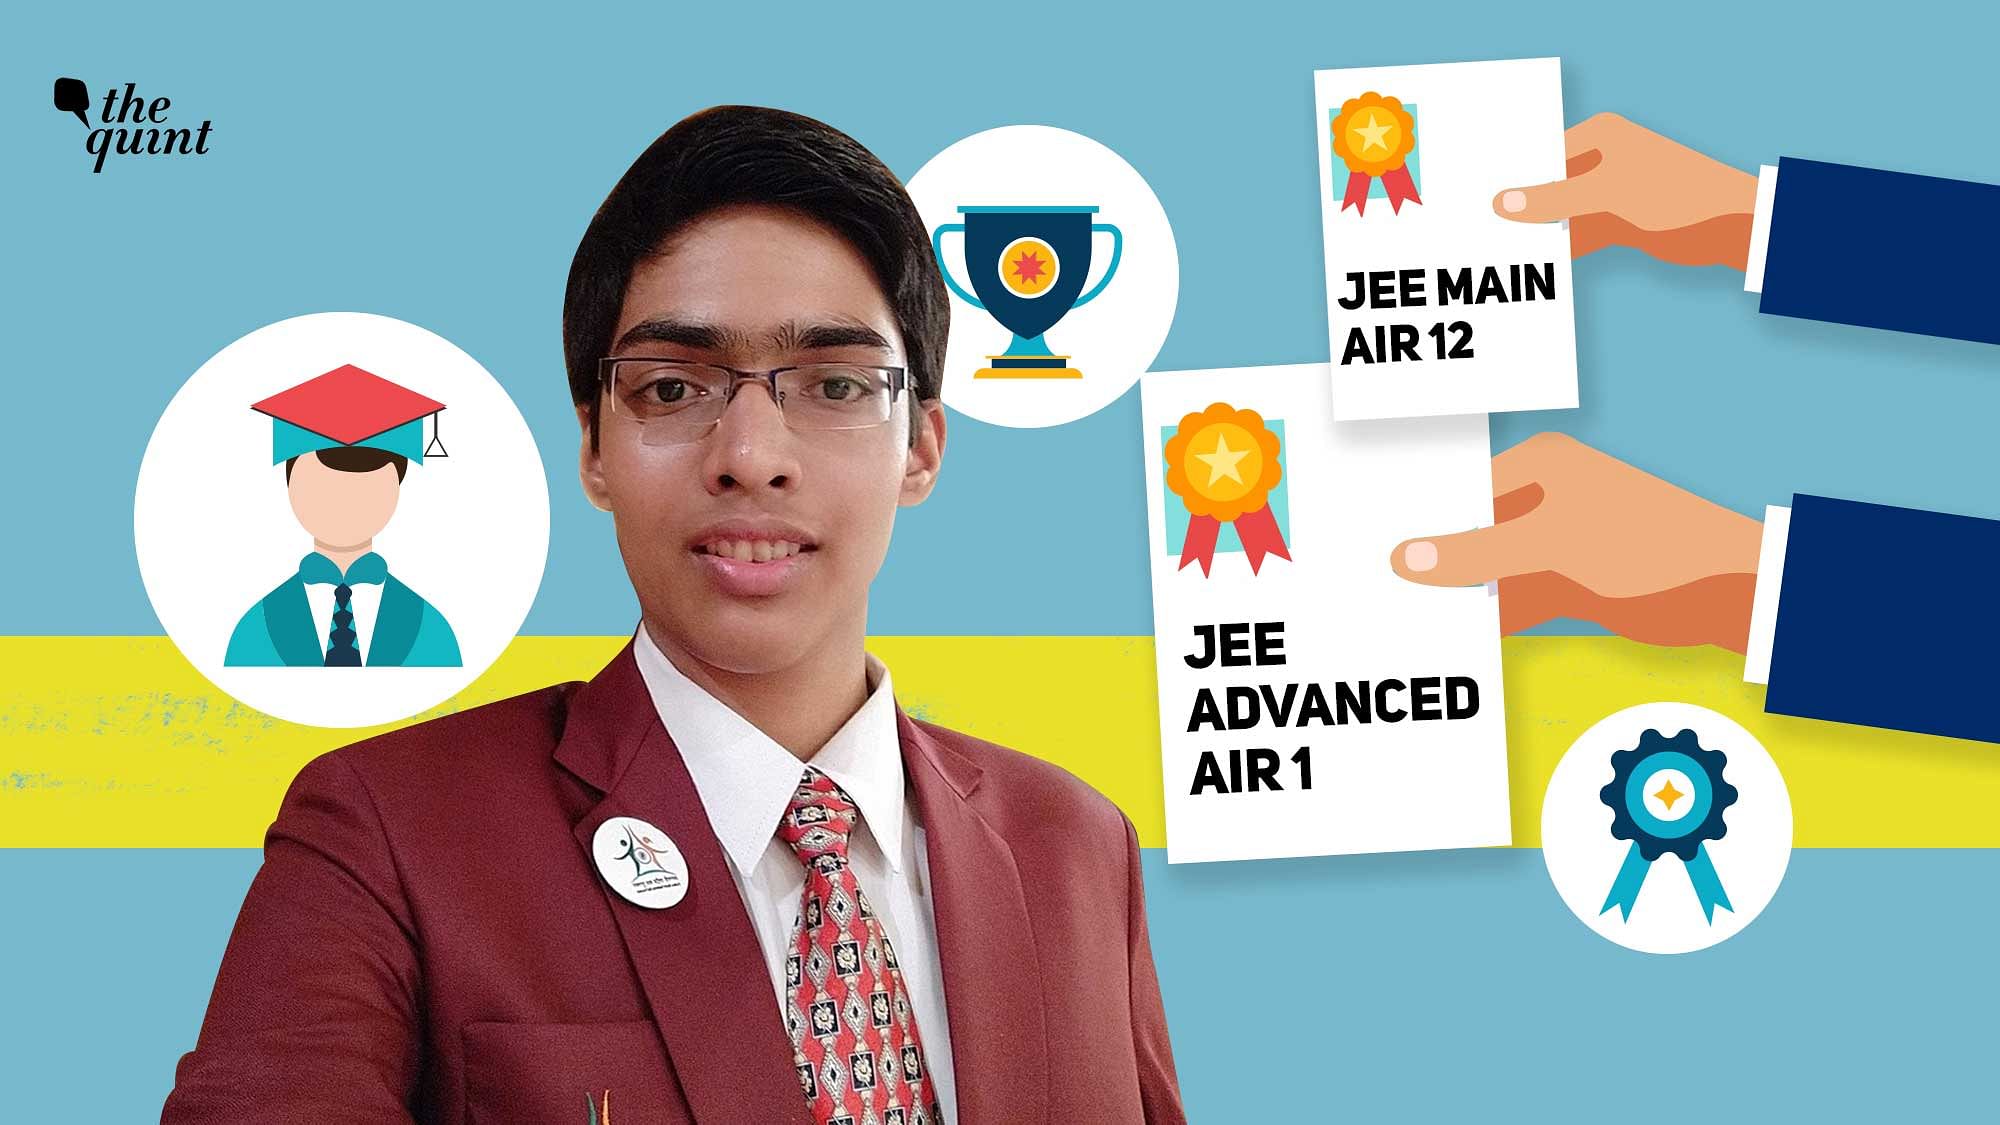 While Chirag came 1st in JEE Advanced 2020, he had ranked 12th in JEE Main conducted in September this year.&nbsp;